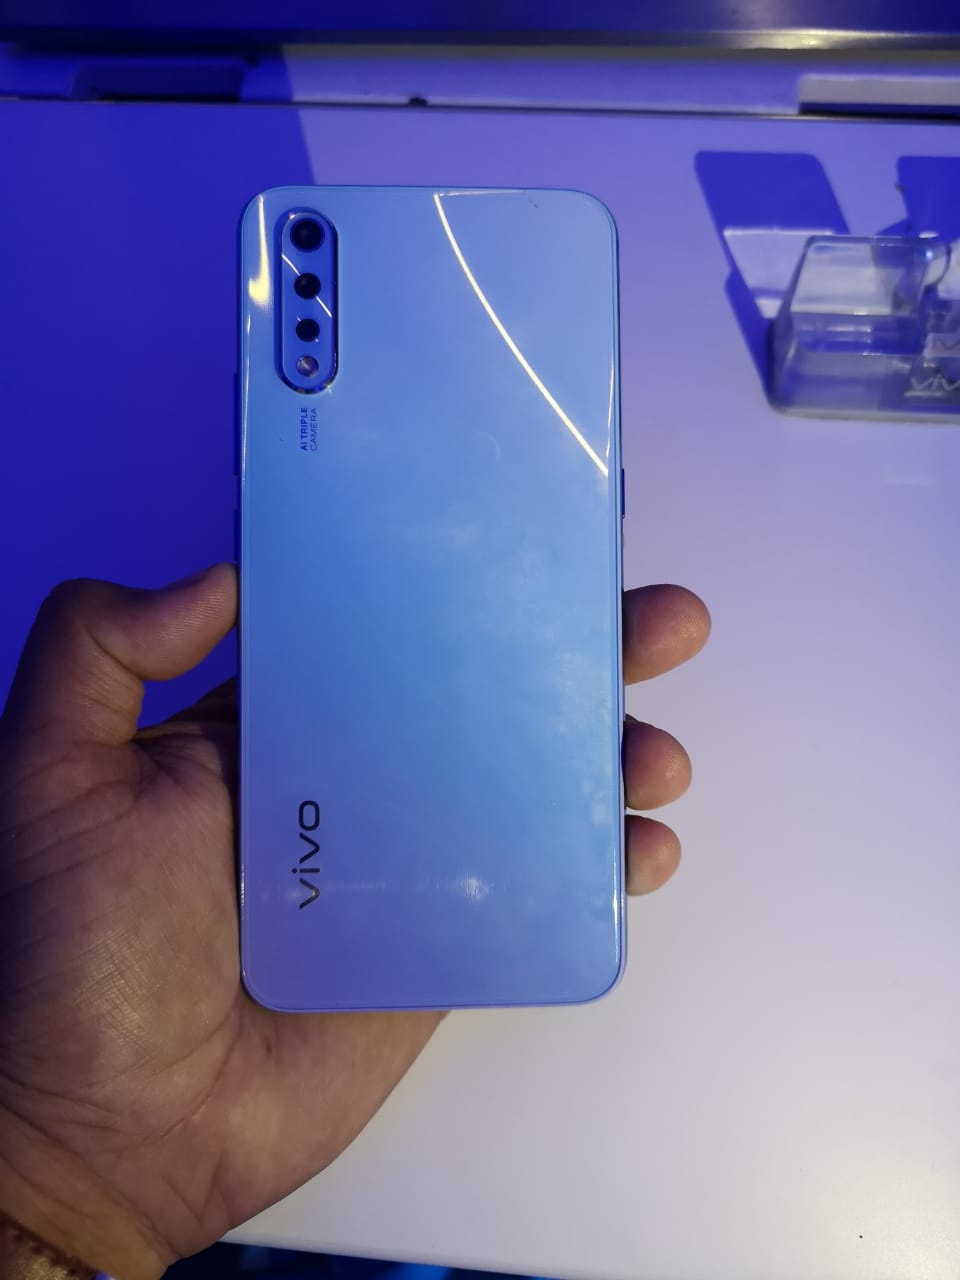 Vivo S1 officially launched in Pakistan Price, Specs, Availability